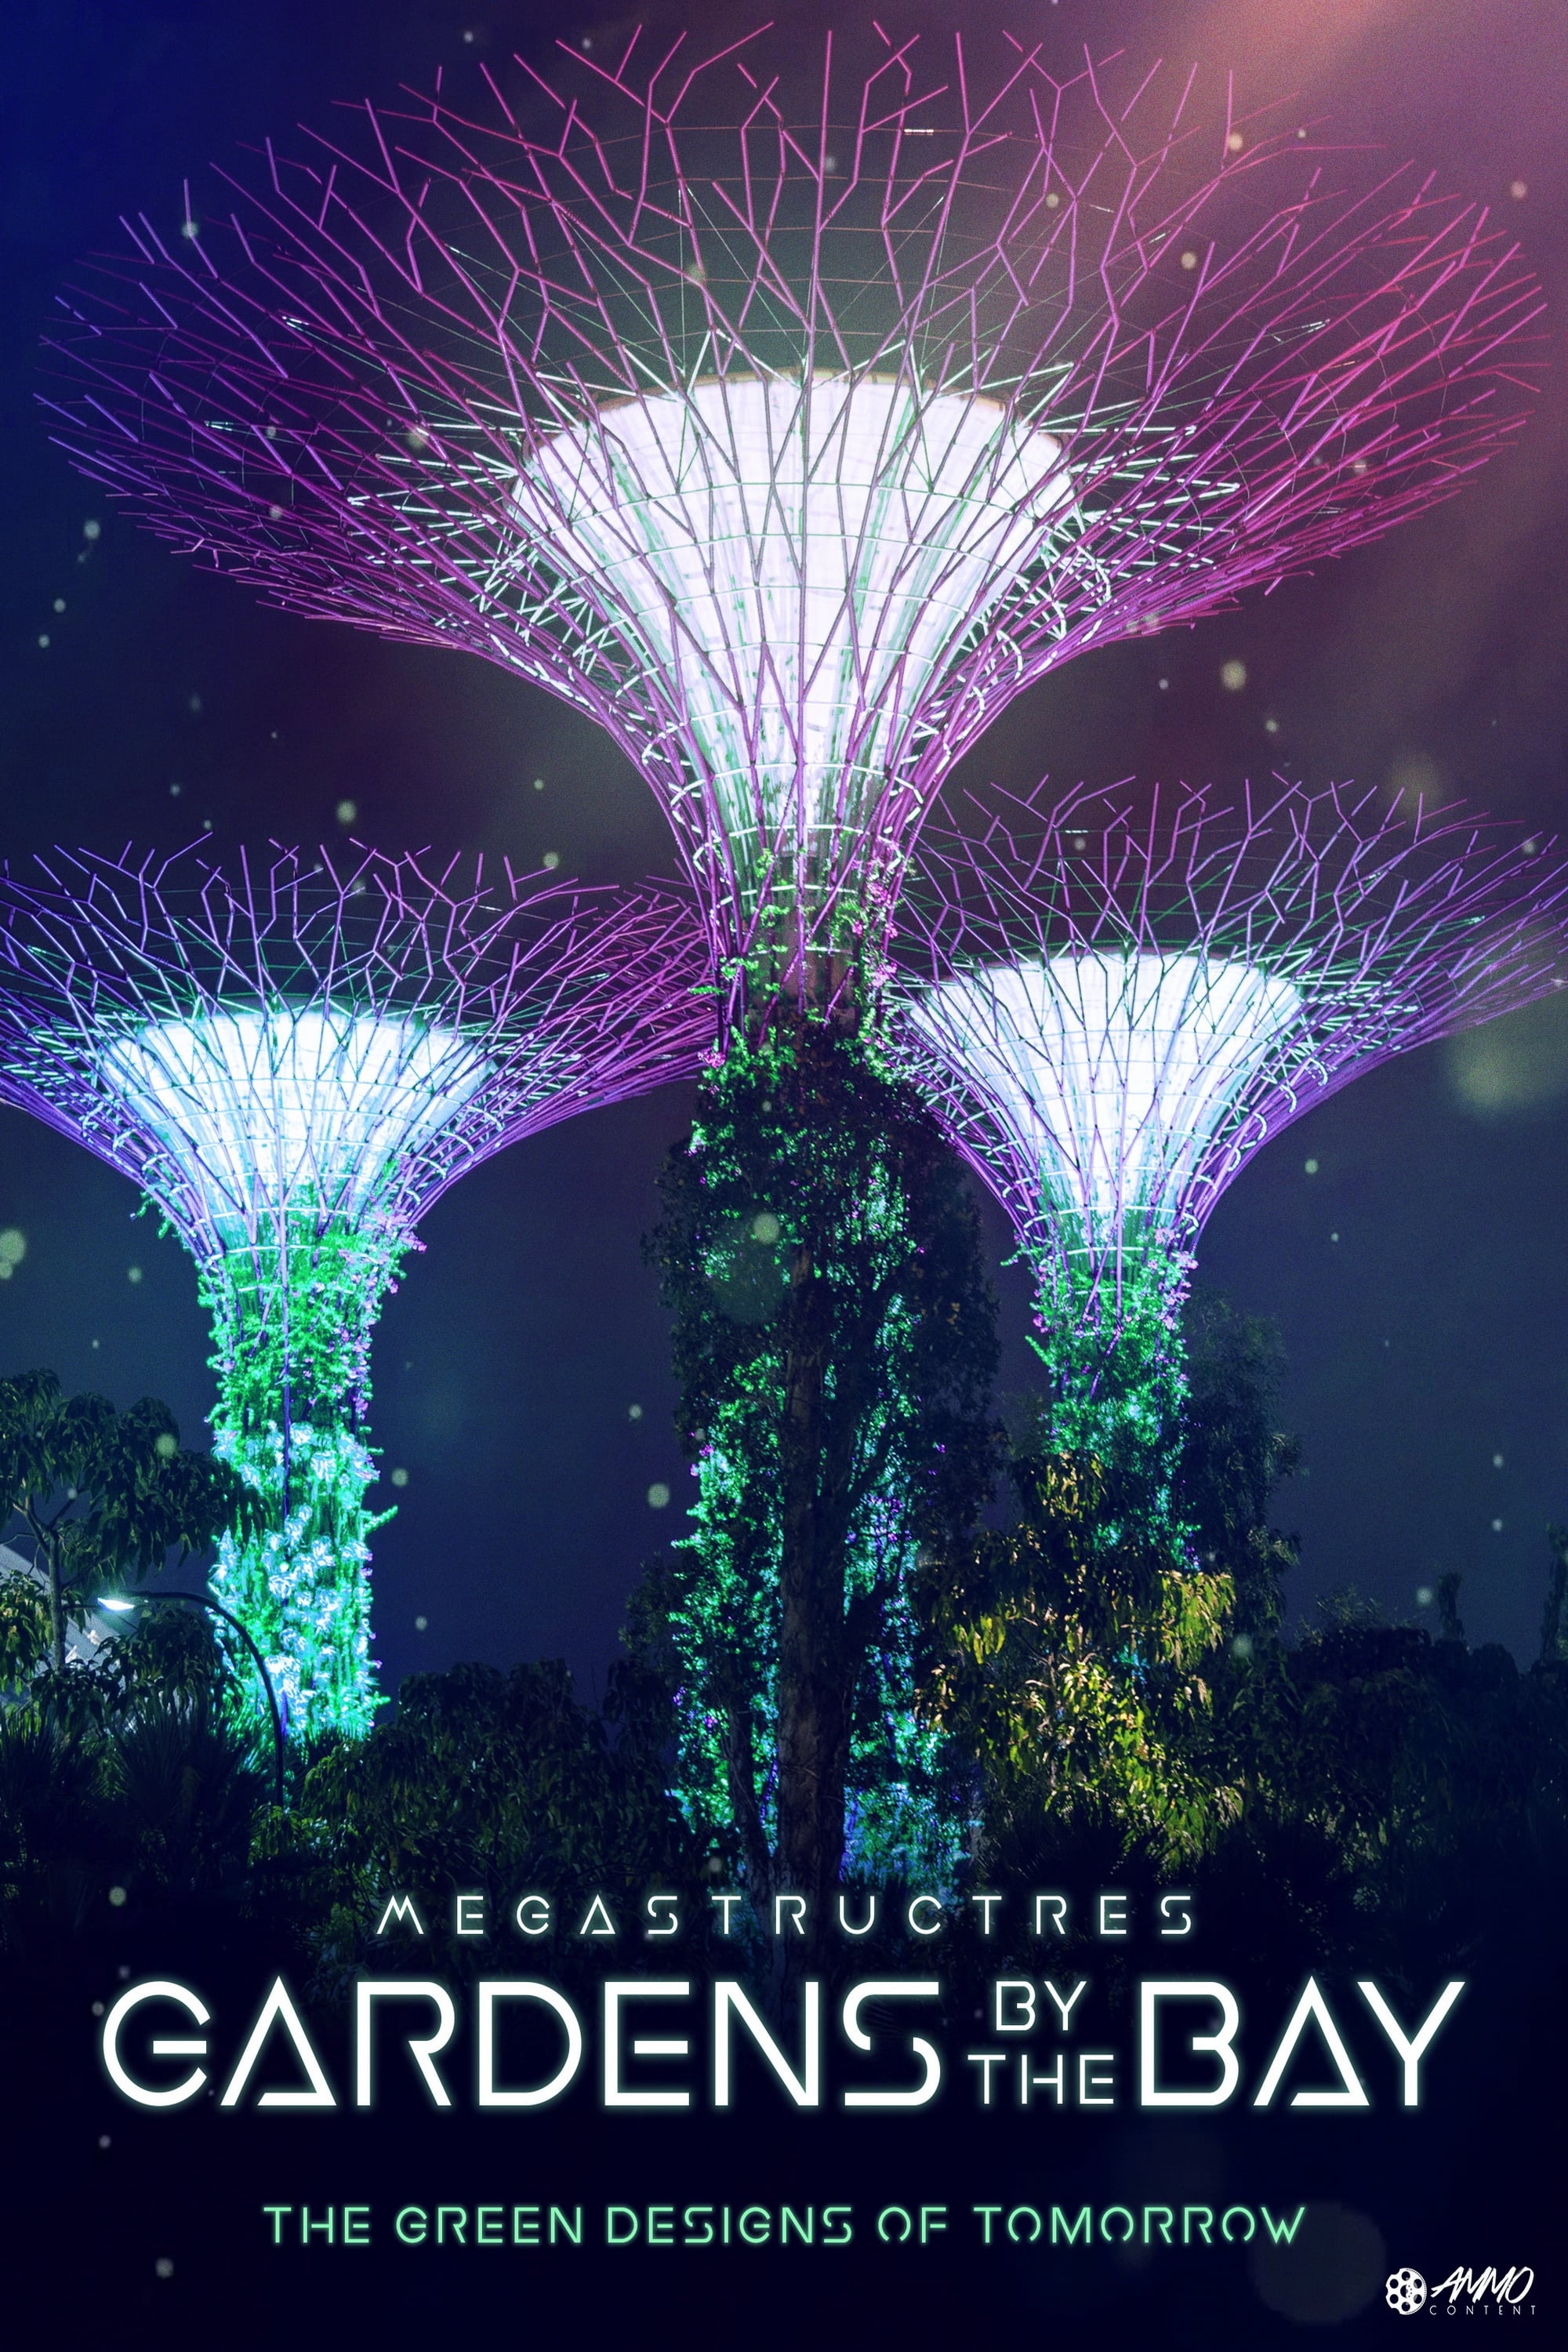 Megastructures: Gardens by the bay